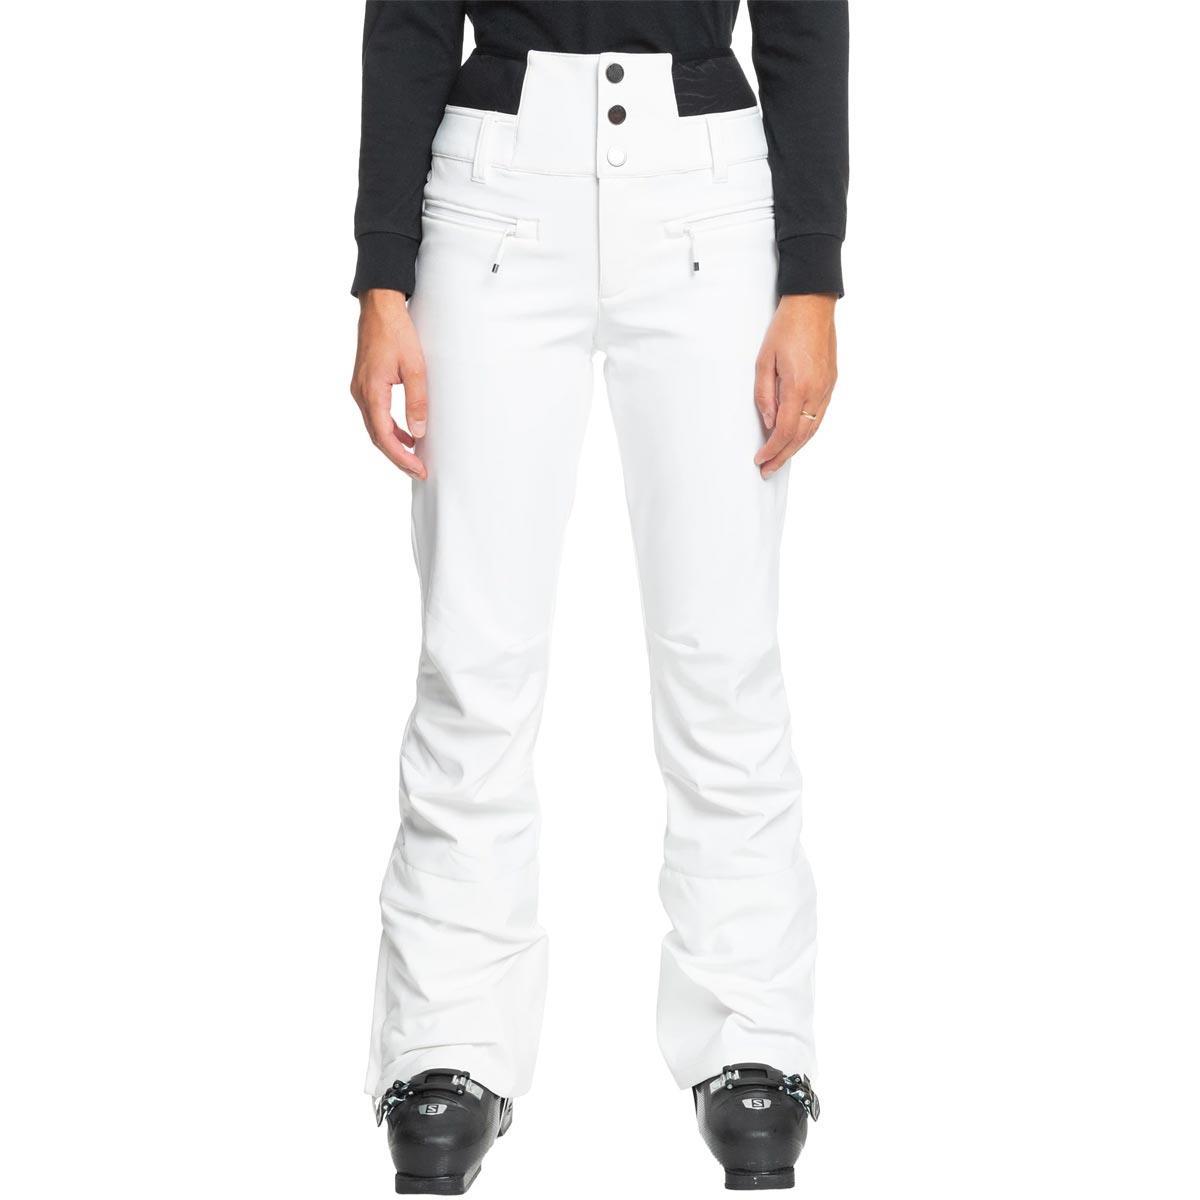 Rising High - Technical Snow Pants for Women